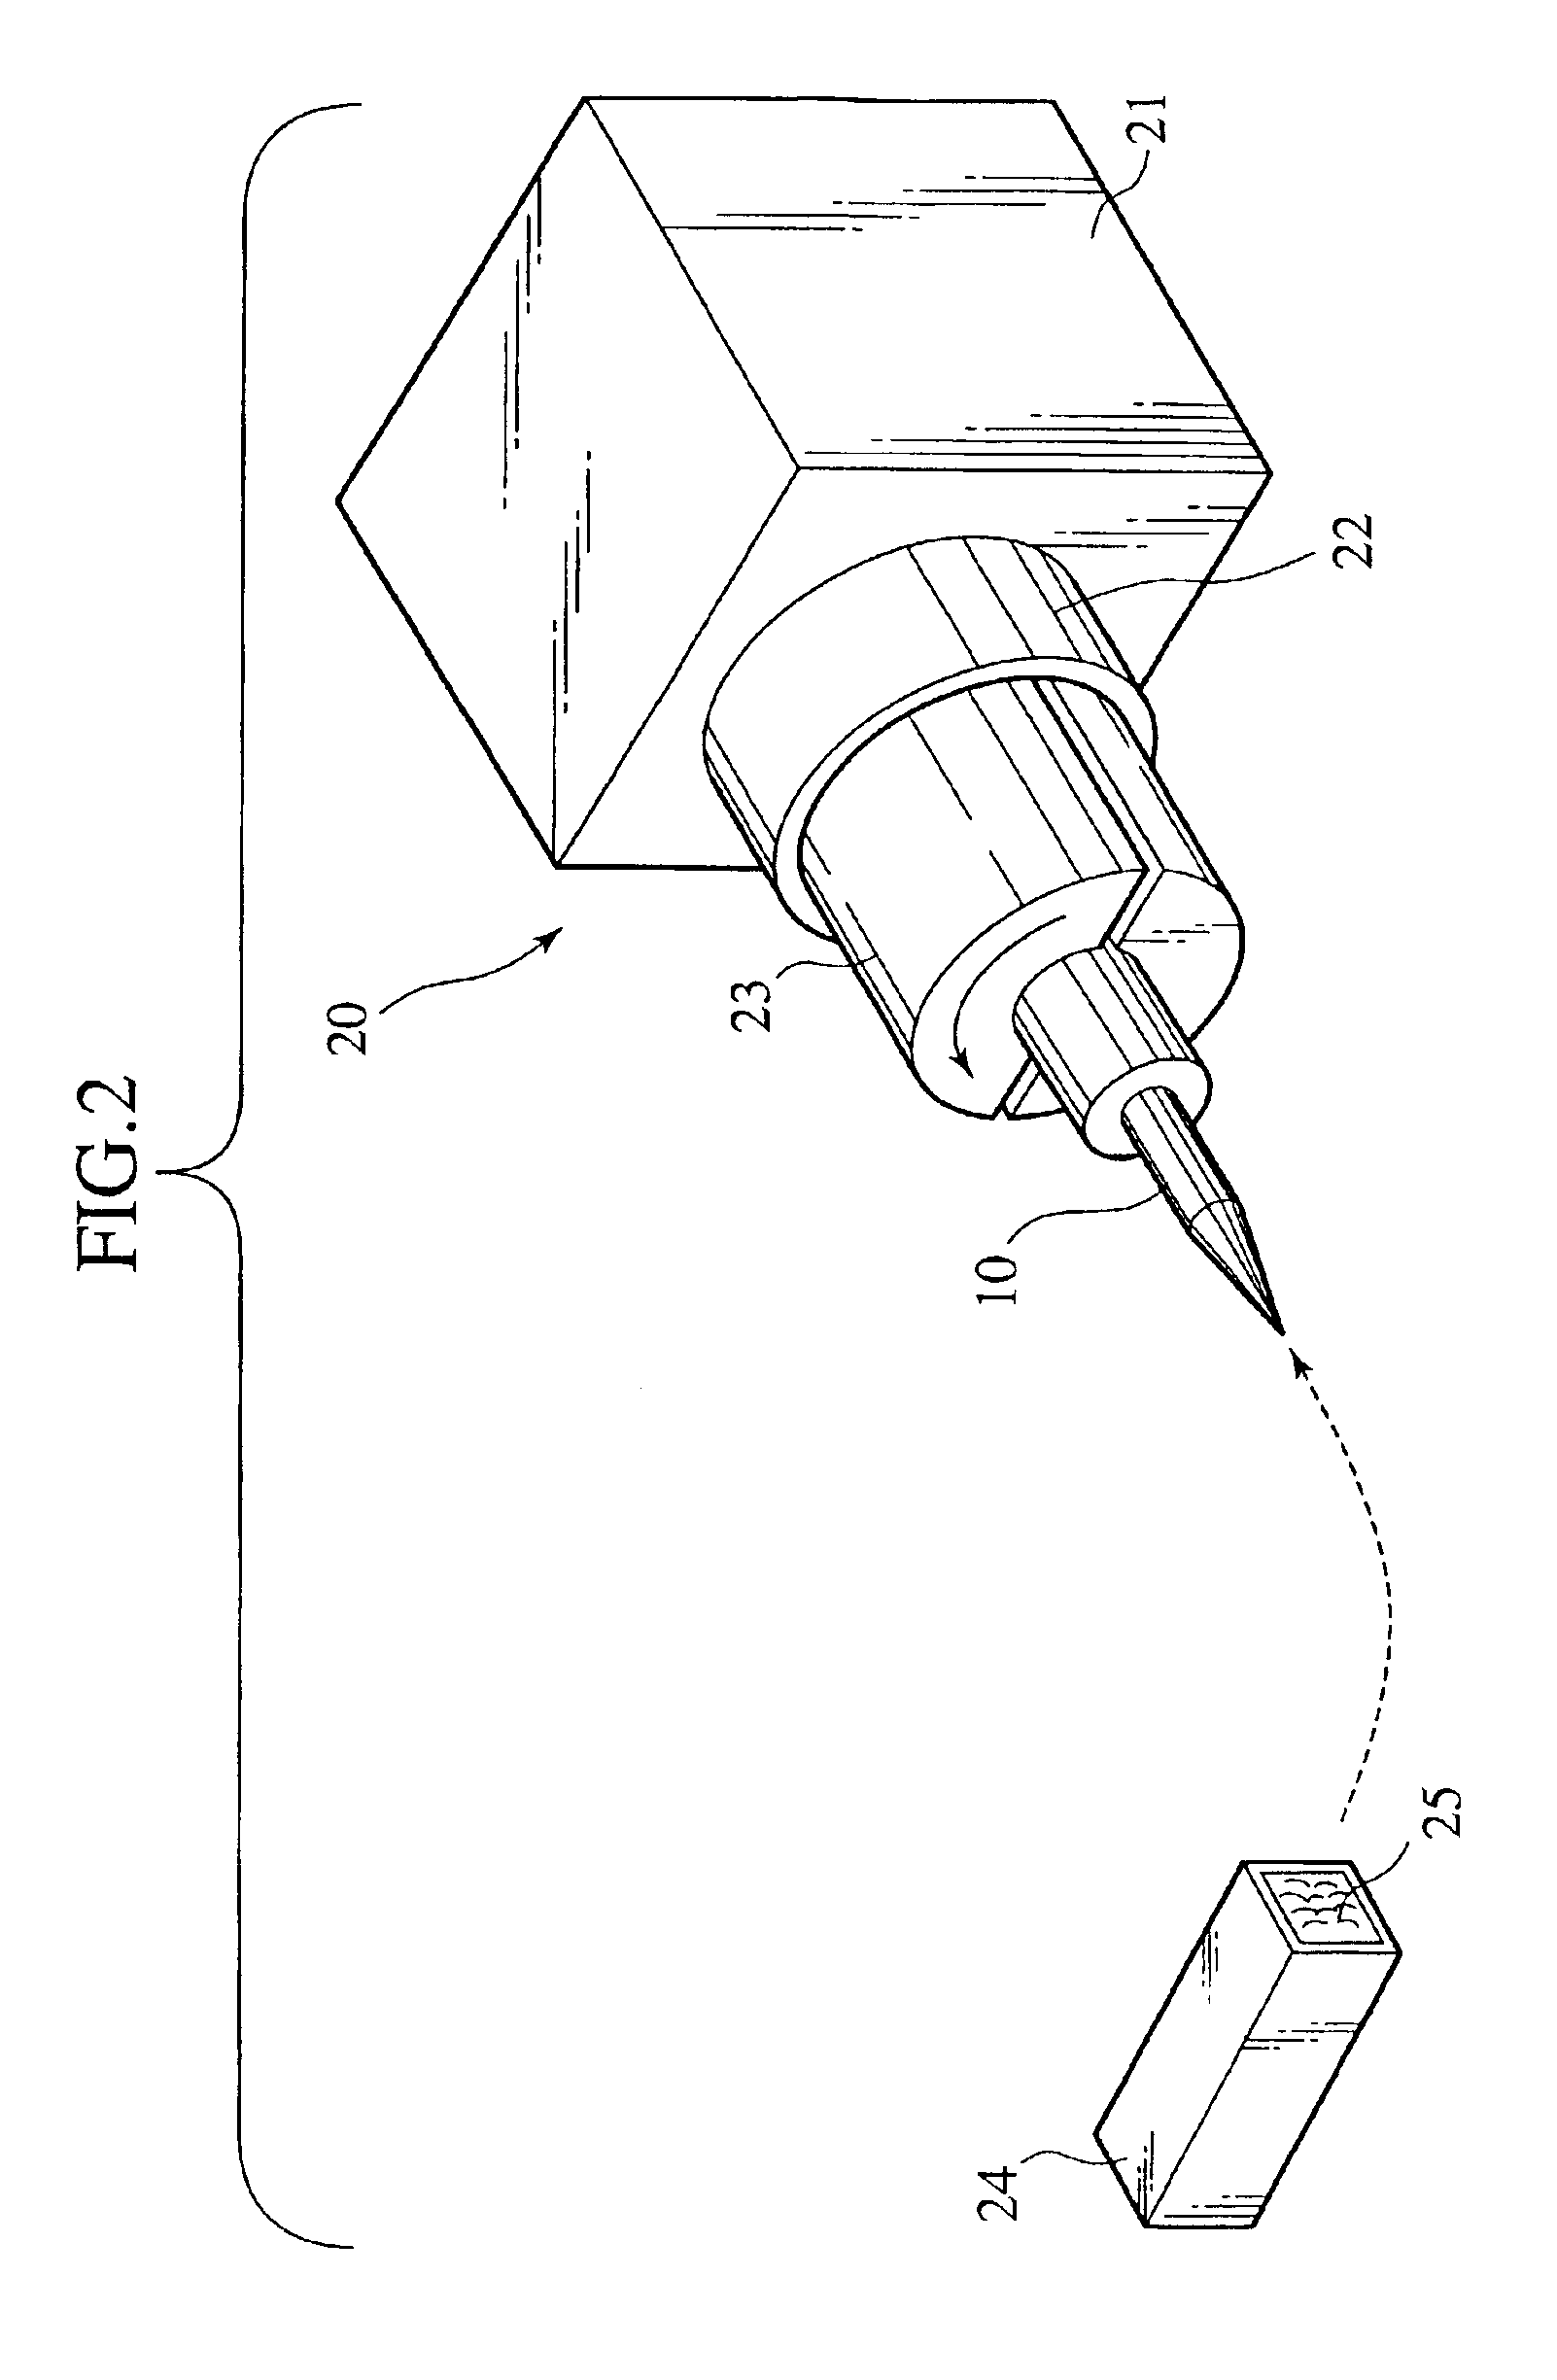 Cleaning apparatus for electrodes of optical fiber fusion splicer